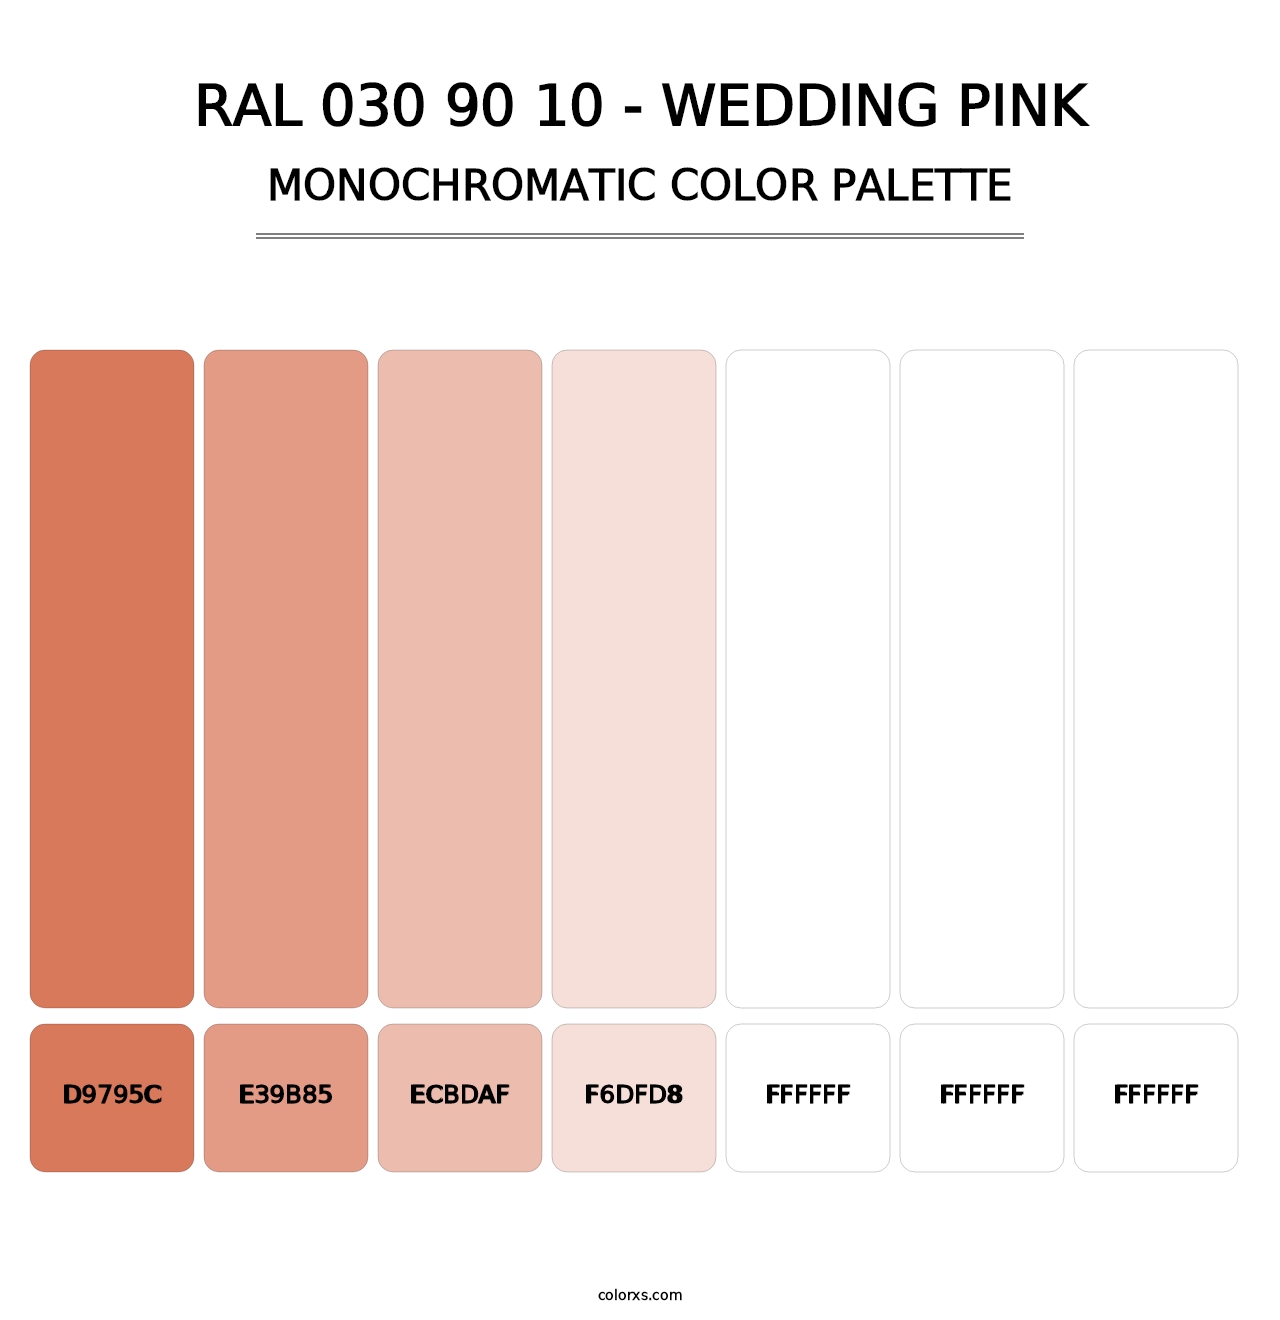 RAL 030 90 10 - Wedding Pink - Monochromatic Color Palette